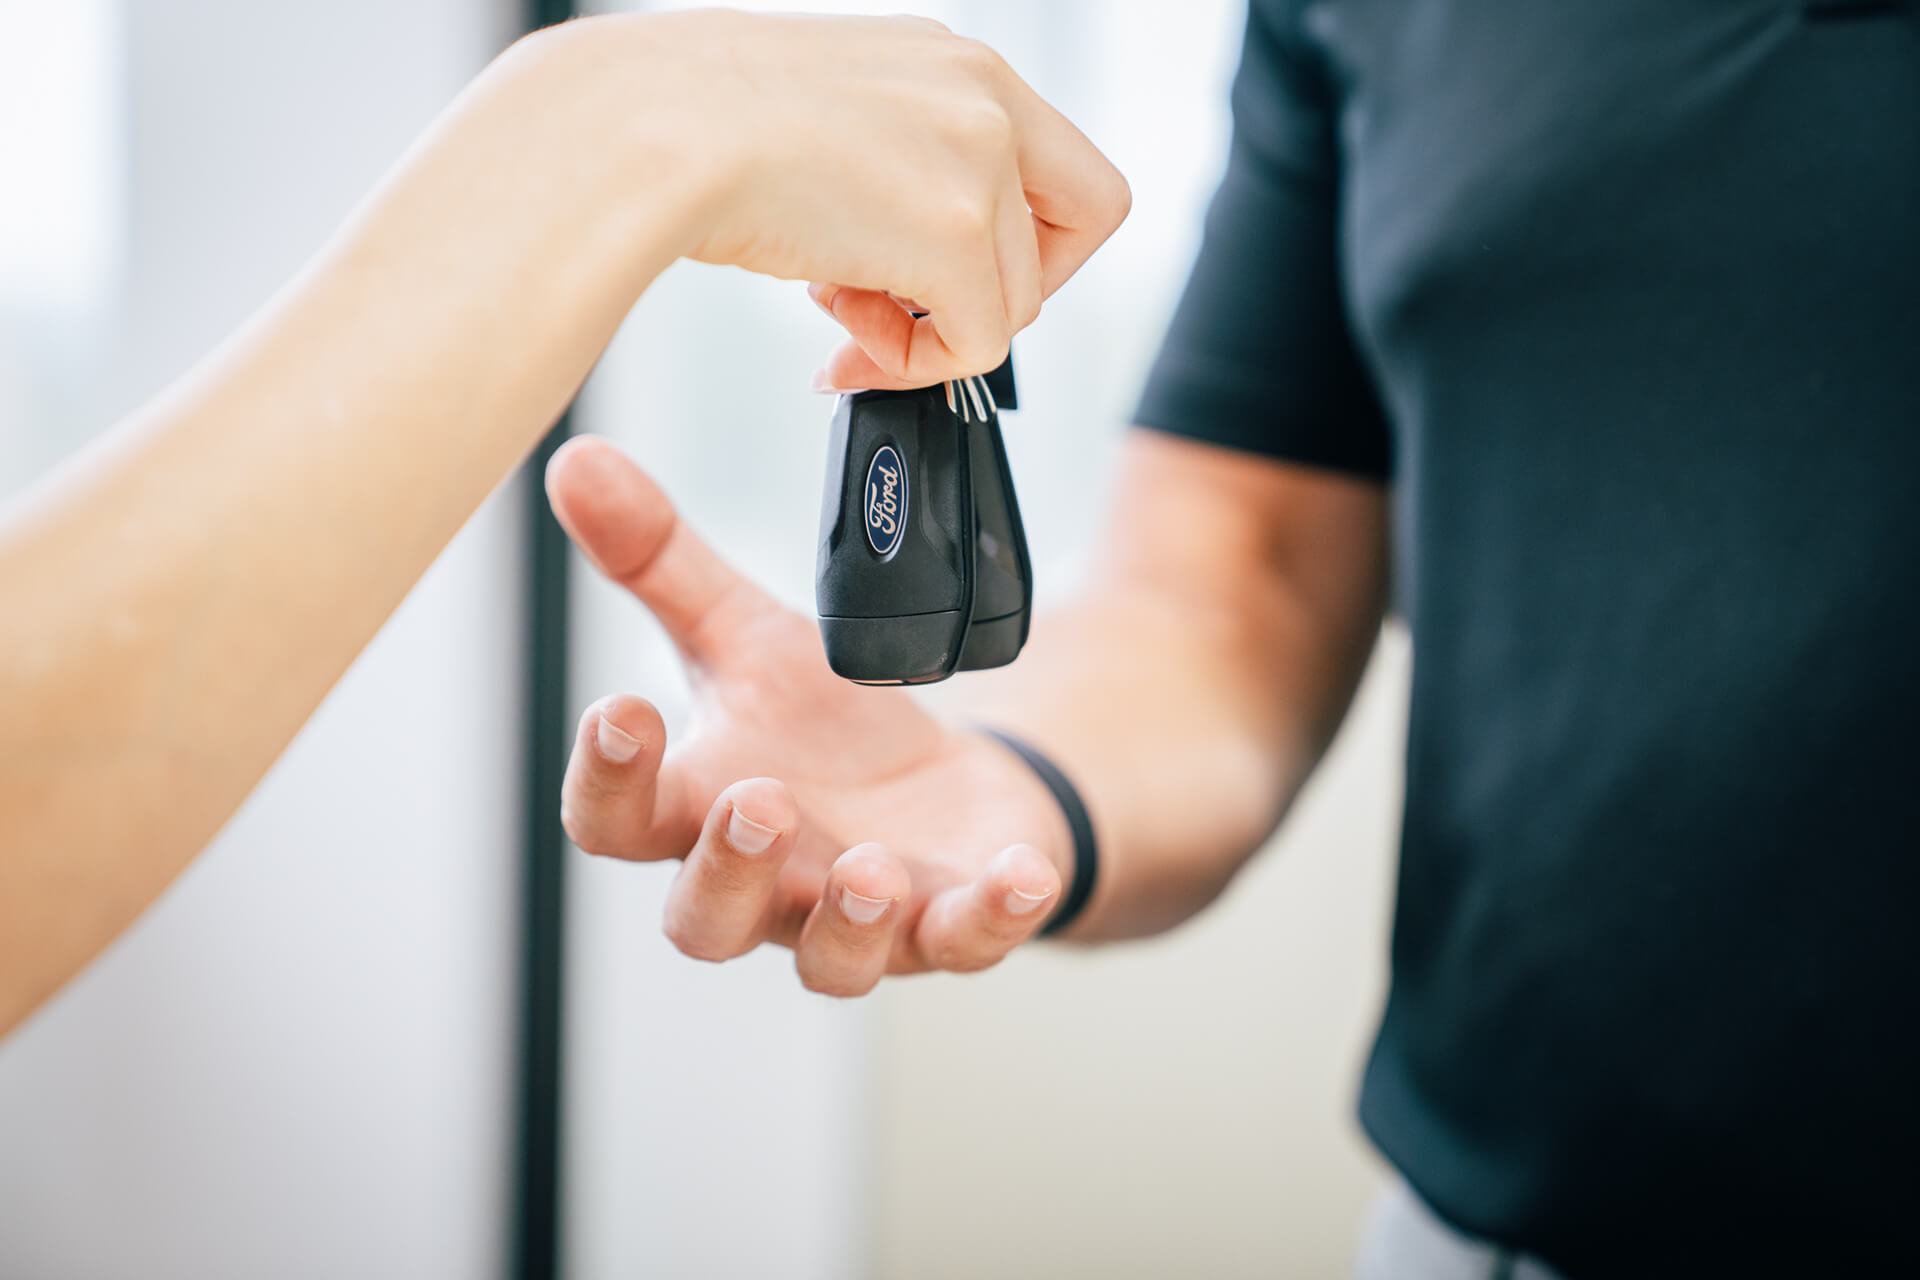 A person transferring a car key to another person during a model photography shoot.